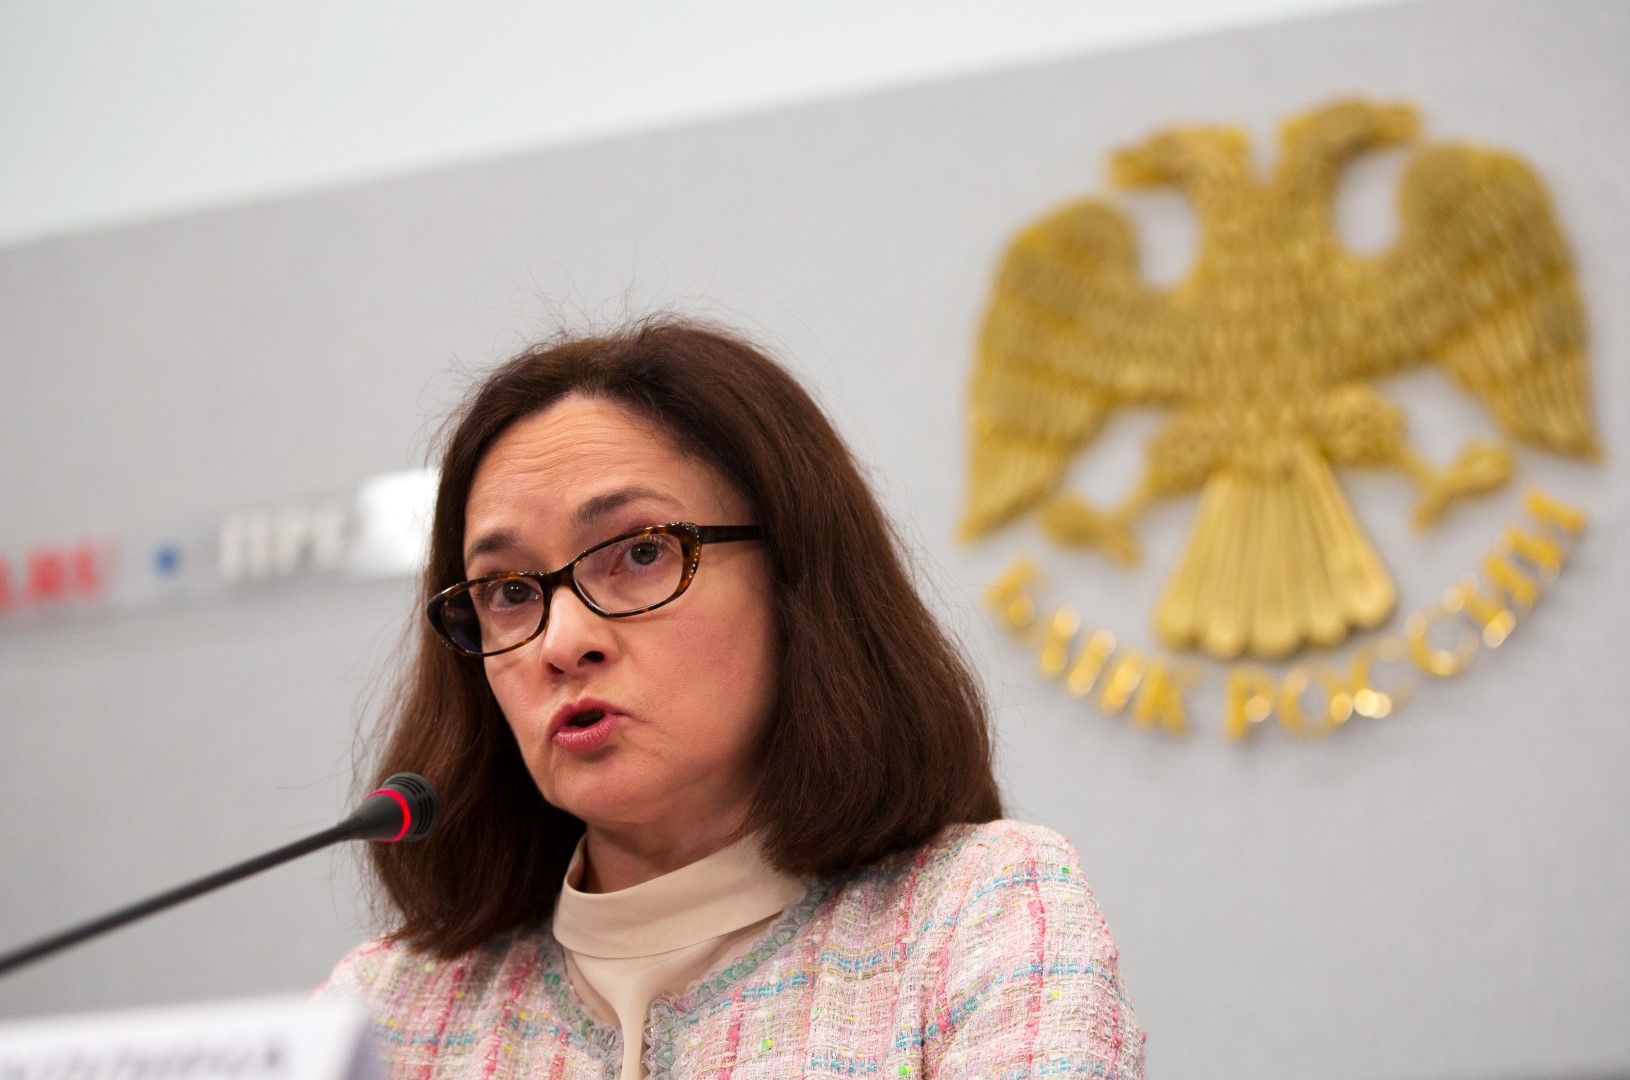 Elvira Nabiullina, governor of Russia's central bank, speaks during a rate decision news conference in Moscow, Russia, on Friday, March 13, 2015. Russia's central bank lowered its main interest rate in line with most economist forecasts, as stabilizing inflation clears the path to boosting an economy buckling under low oil prices and sanctions over Ukraine. Photographer: Andrey Rudakov/Bloomberg *** Local Caption *** Elvira Nabiullina